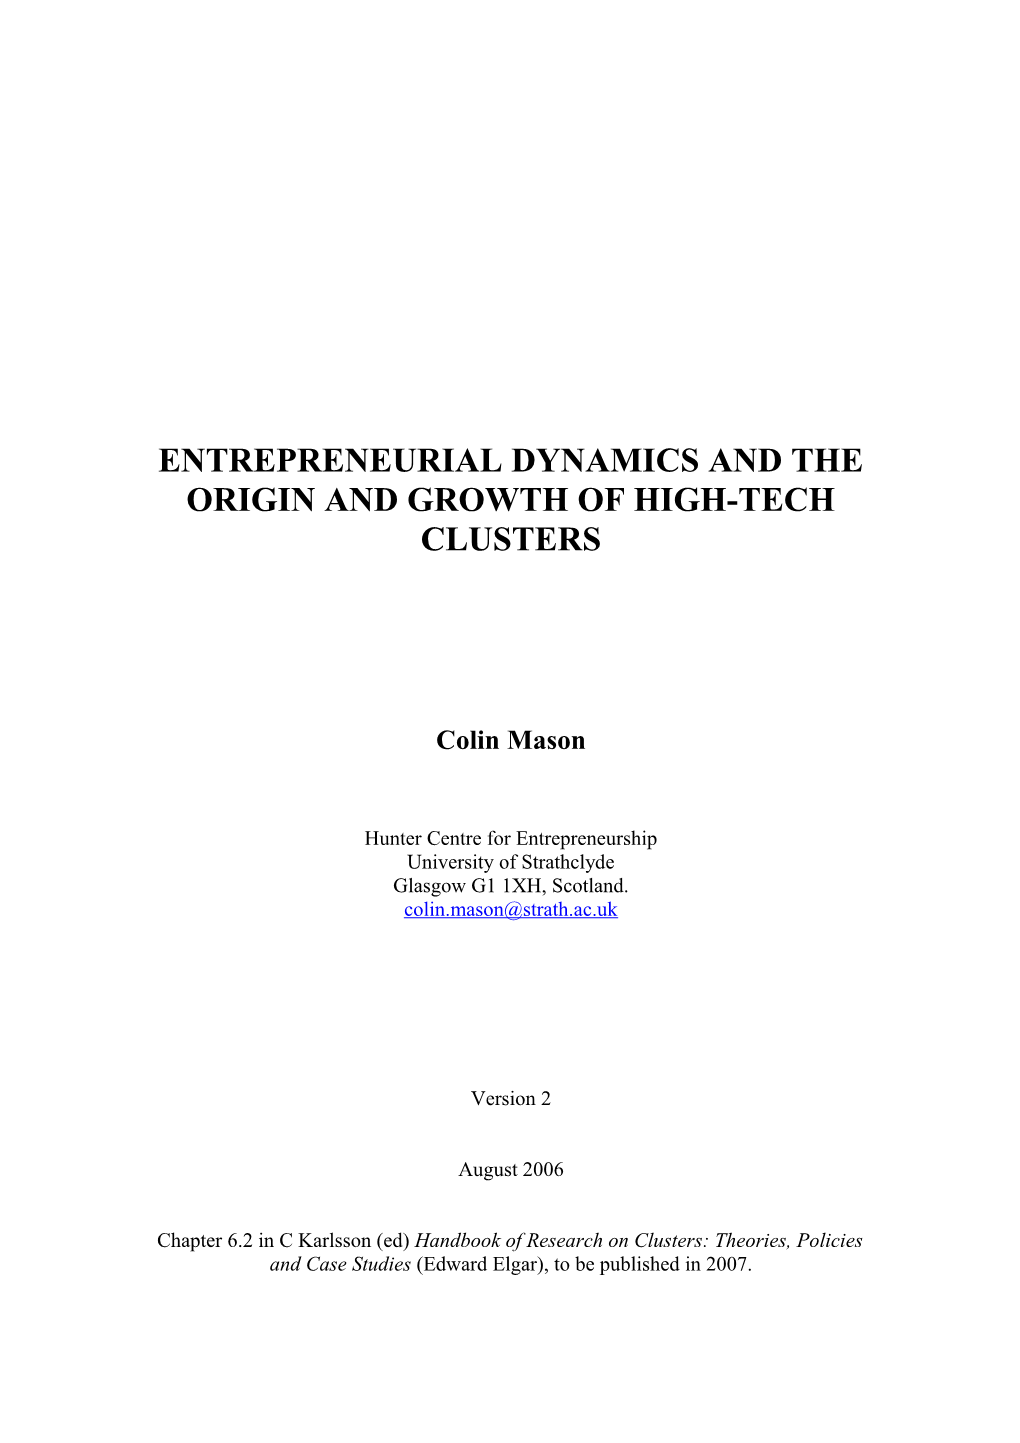 Entrepreneurial Dynamics and the Origin and Growth of High-Tech Clusters